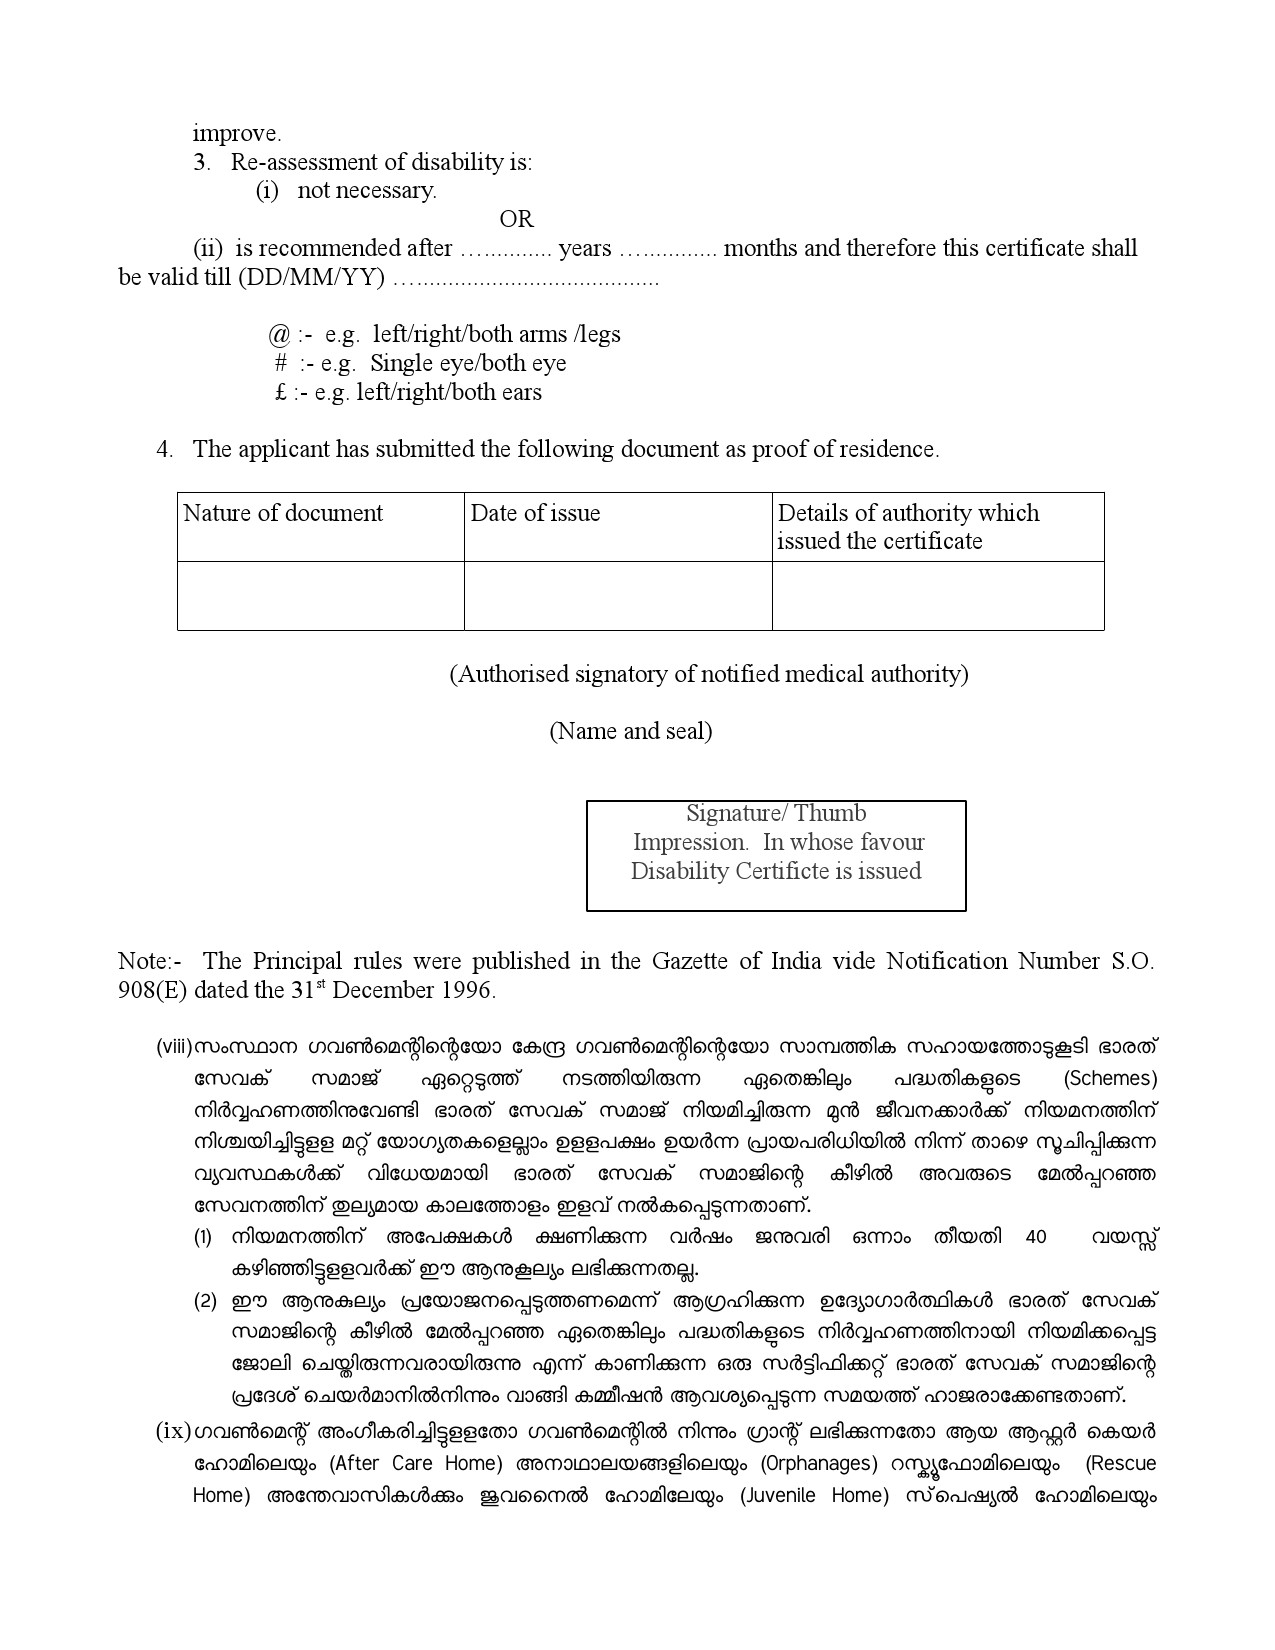 General Conditions and Certificate Formats in Malayalam - Notification Image 8